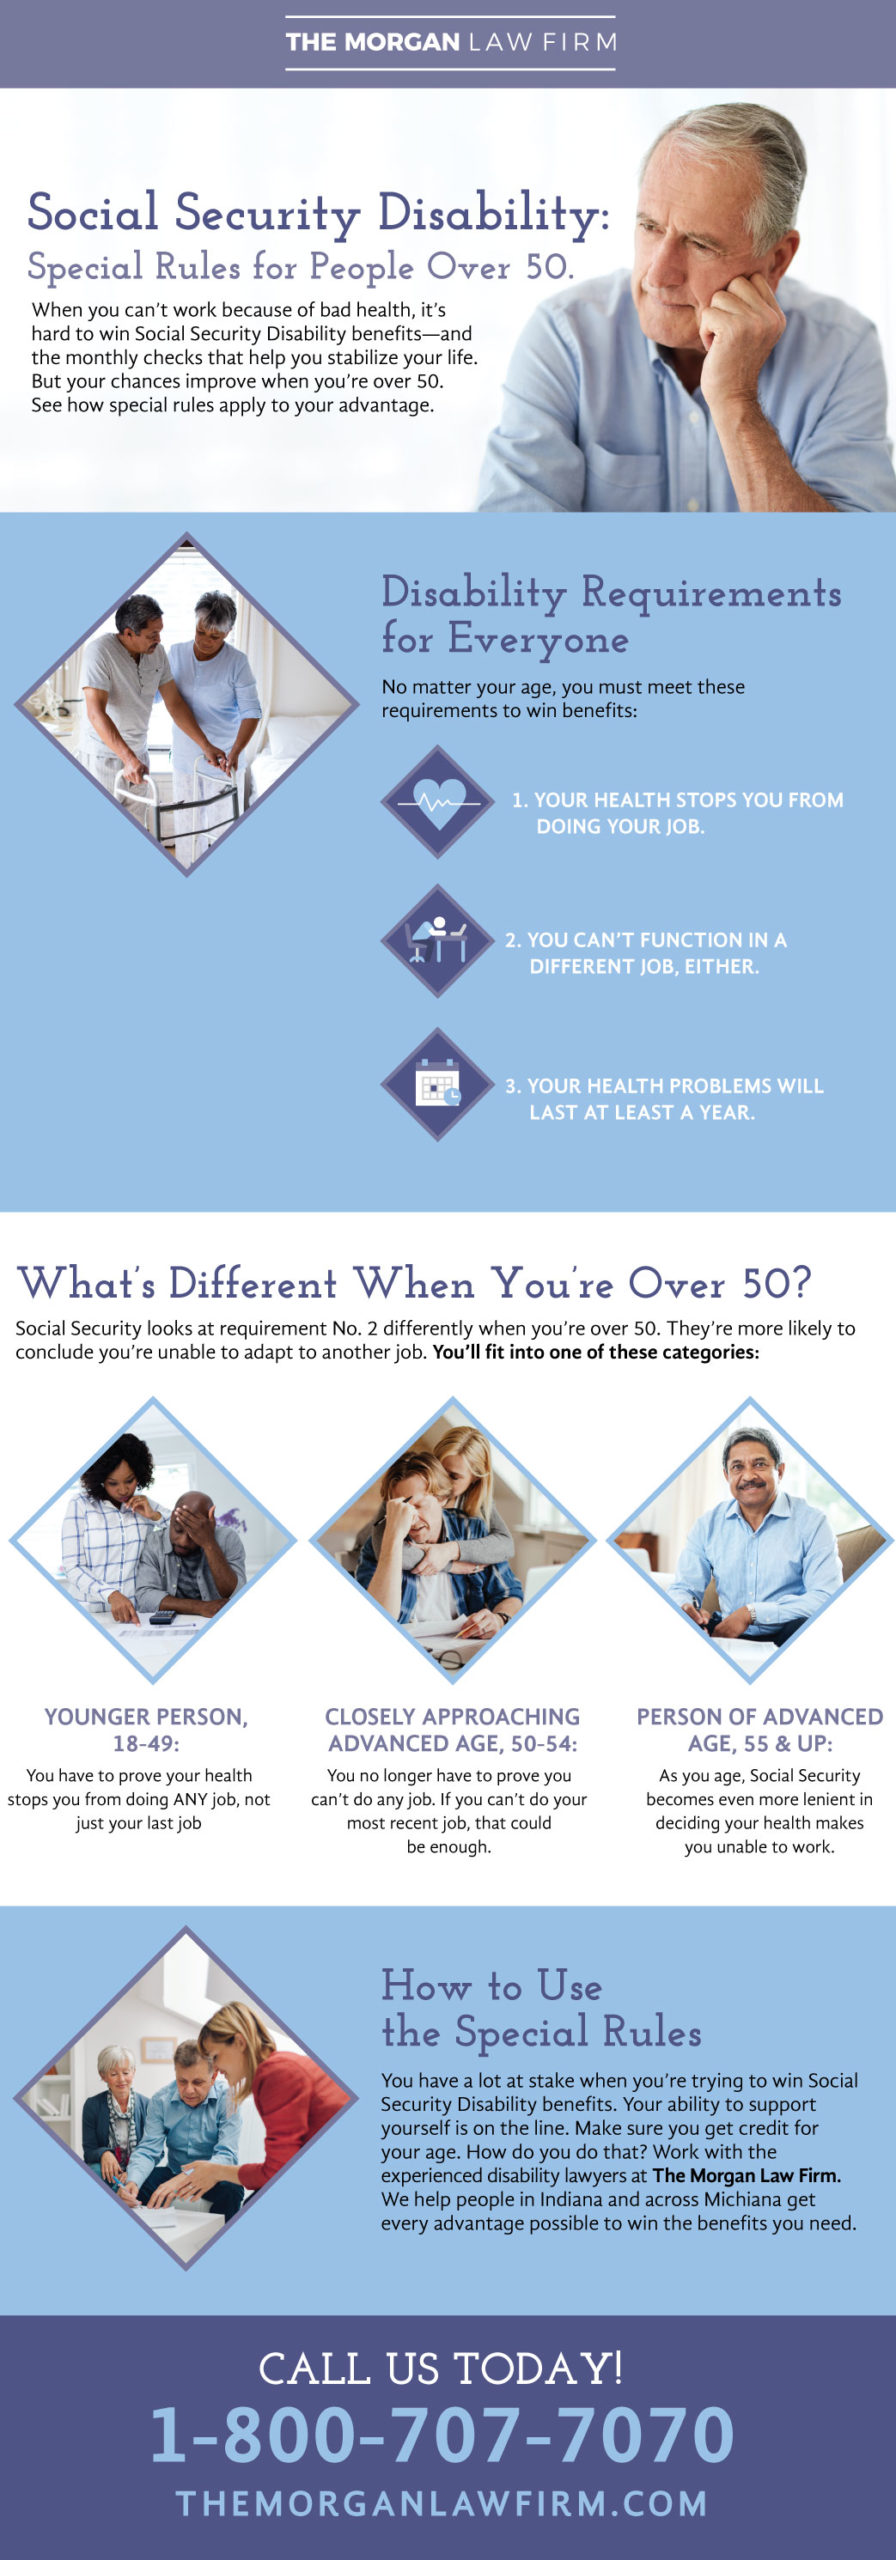 An infographic on special rules for social security disability benefits for individuals over the age of 50.